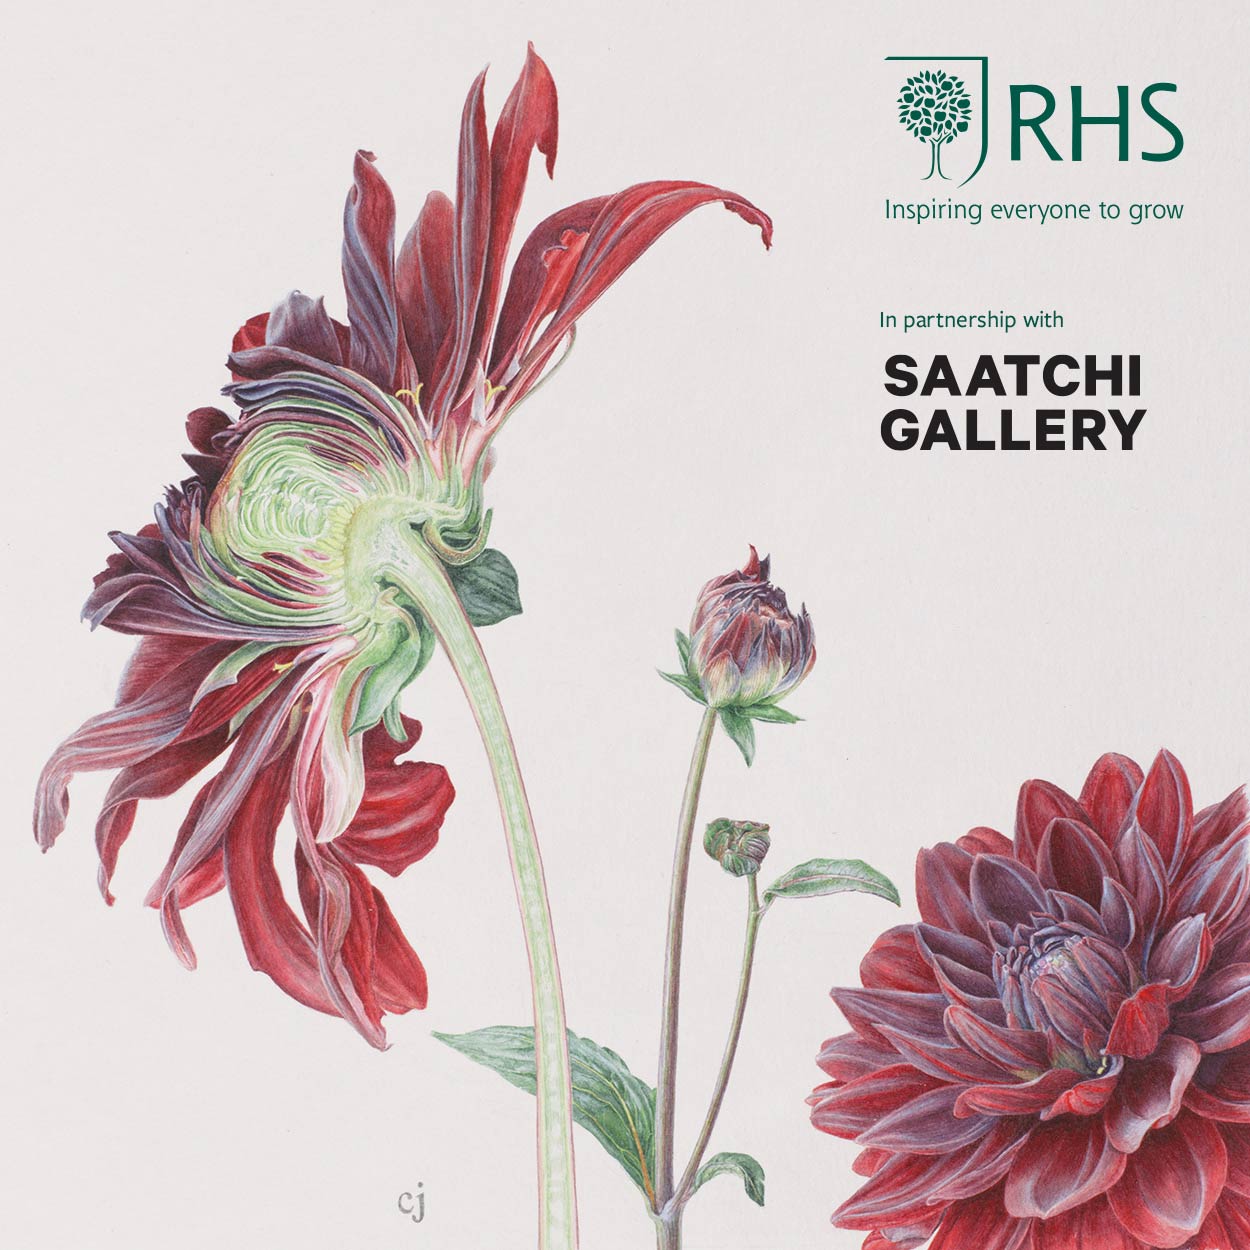 Private viewing of the RHS Botanical Art & Photography Show